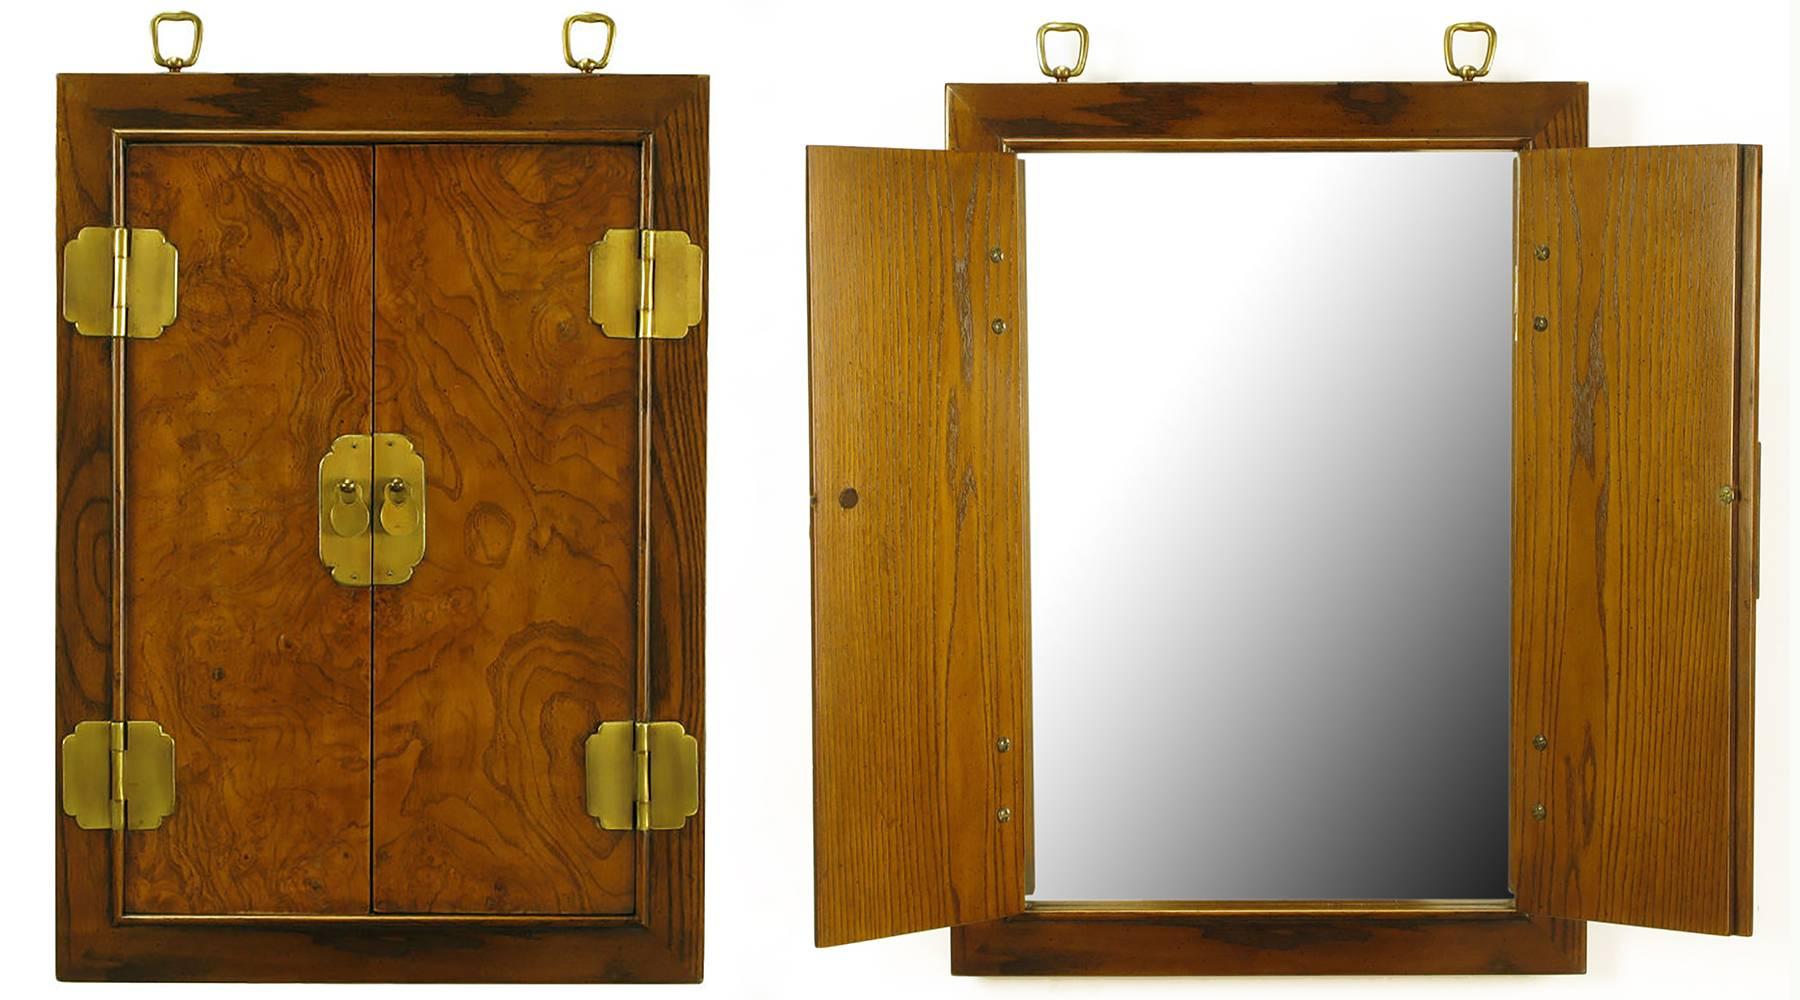 Uncommon two-door enclosed handing wall mirror with exposed brass hinges, brass escutcheons and Asian Style drop disc brass pulls. The doors are covered in burled walnut and the piece s framed in ashwood. Topped with brass ring hangers.